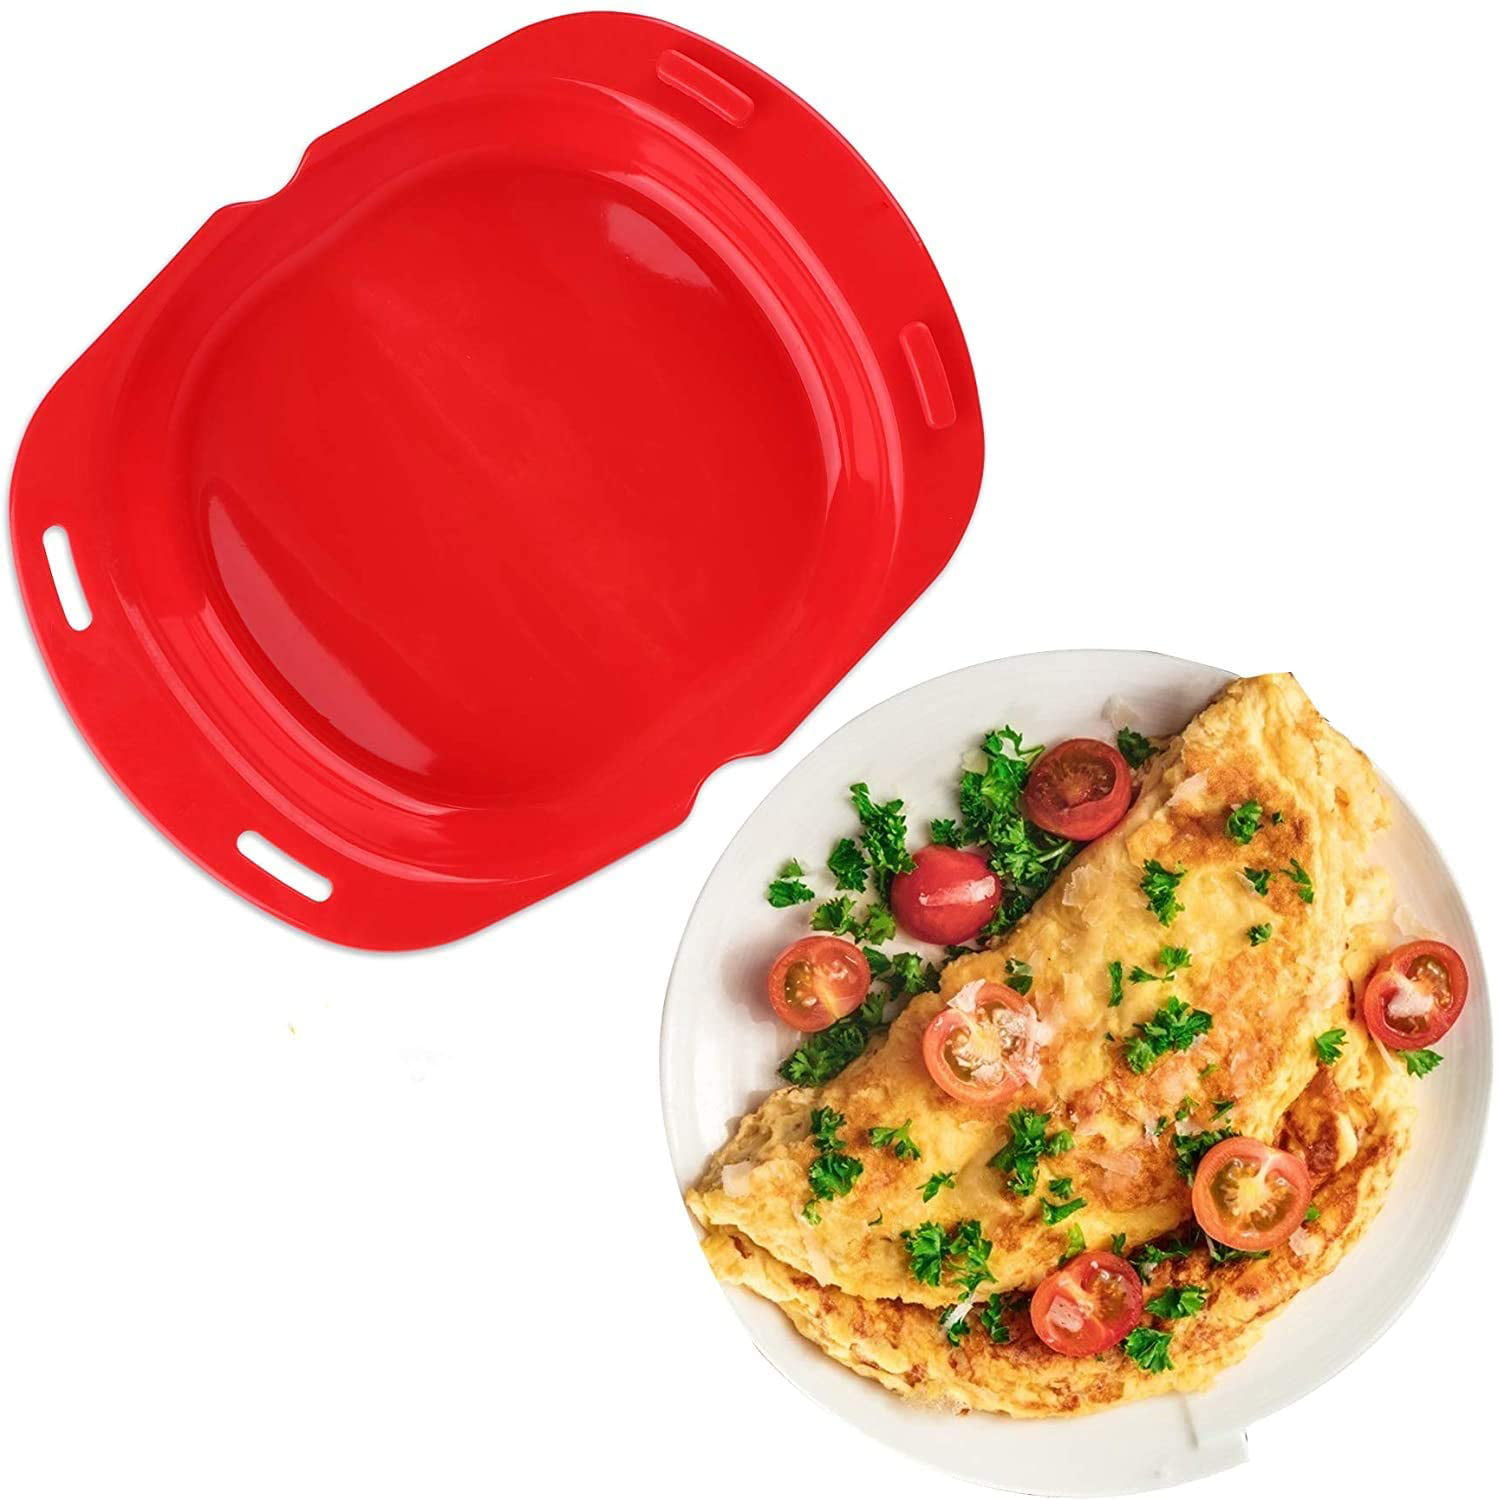 Details about   2 x Microwave Omelette Maker BPA Free Plastic Microwave Accessories 